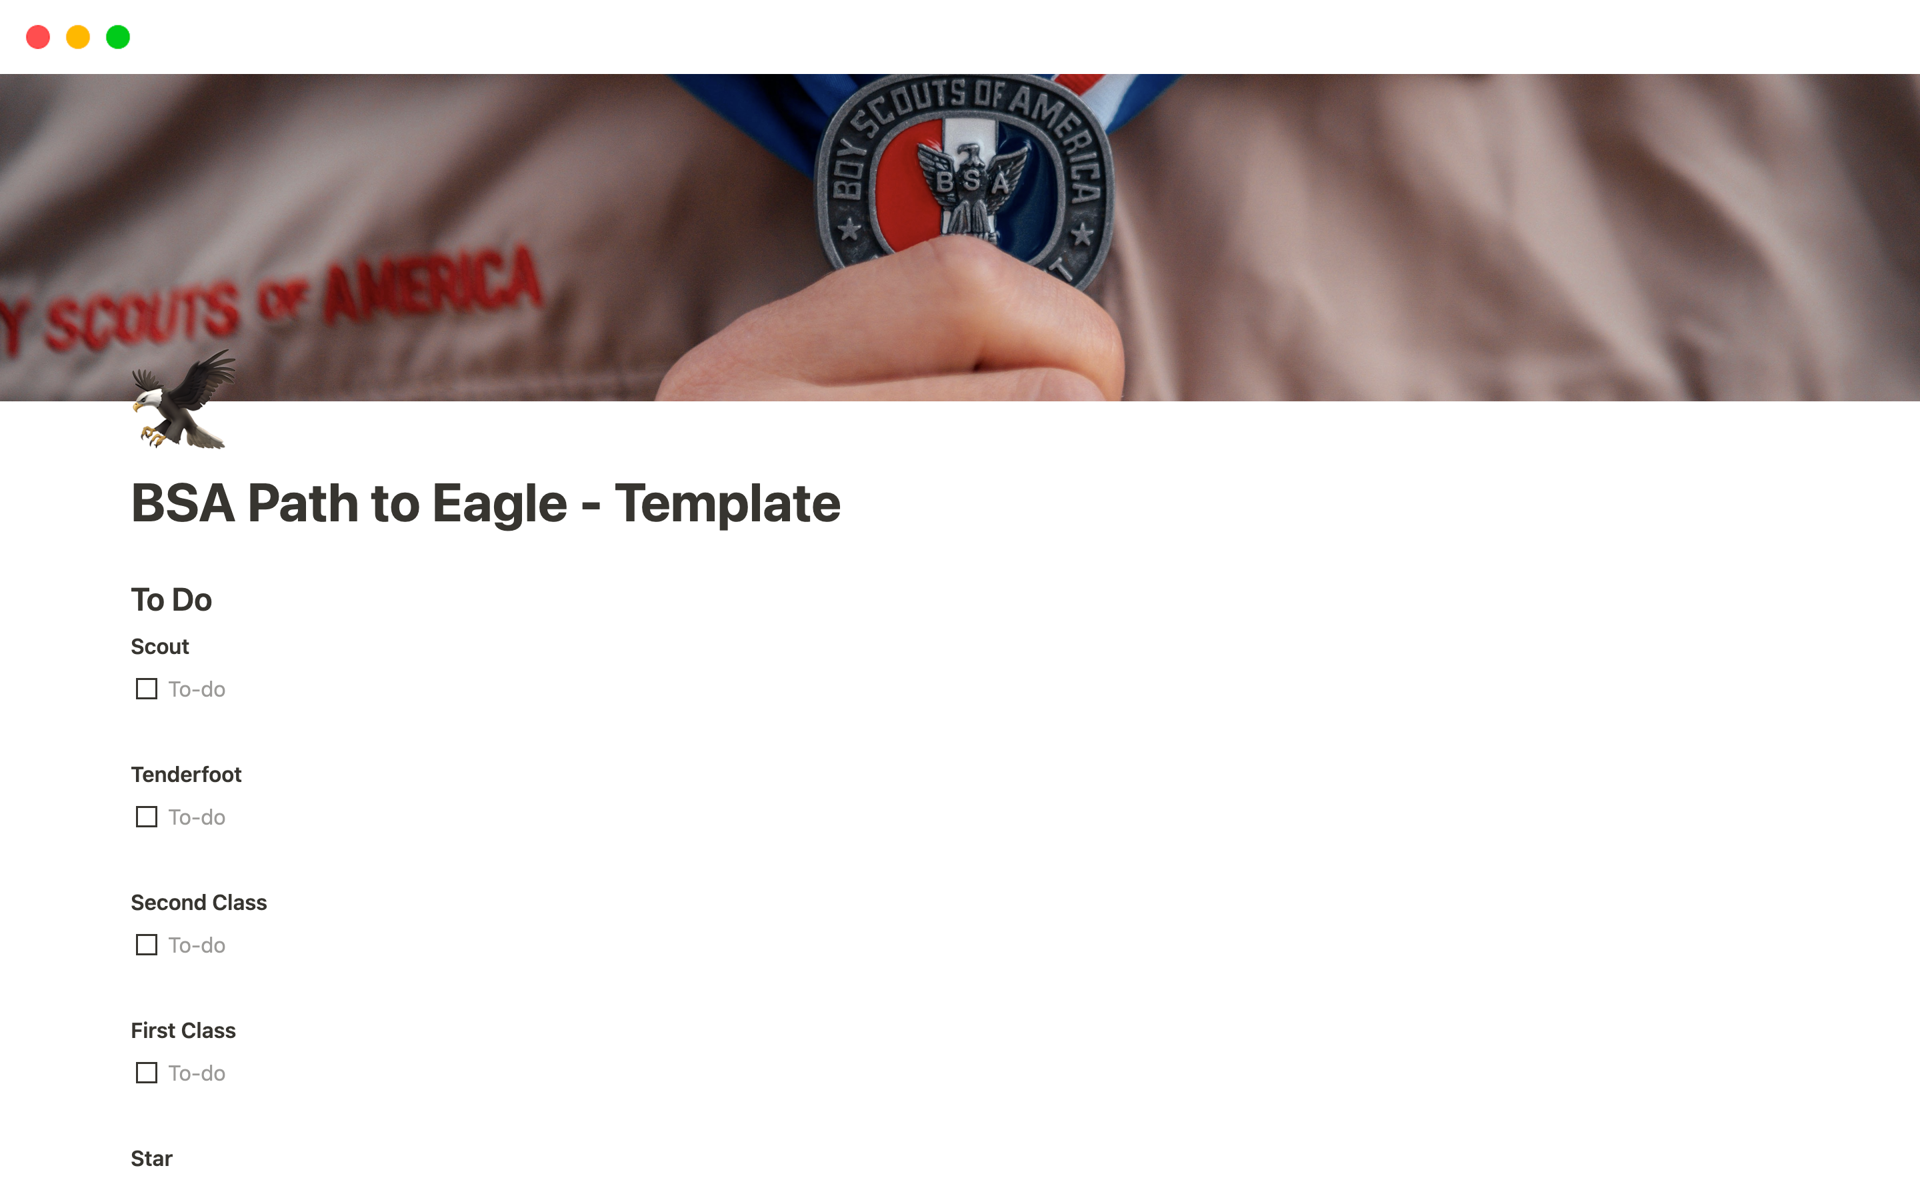 A template for becoming an Eagle Scout